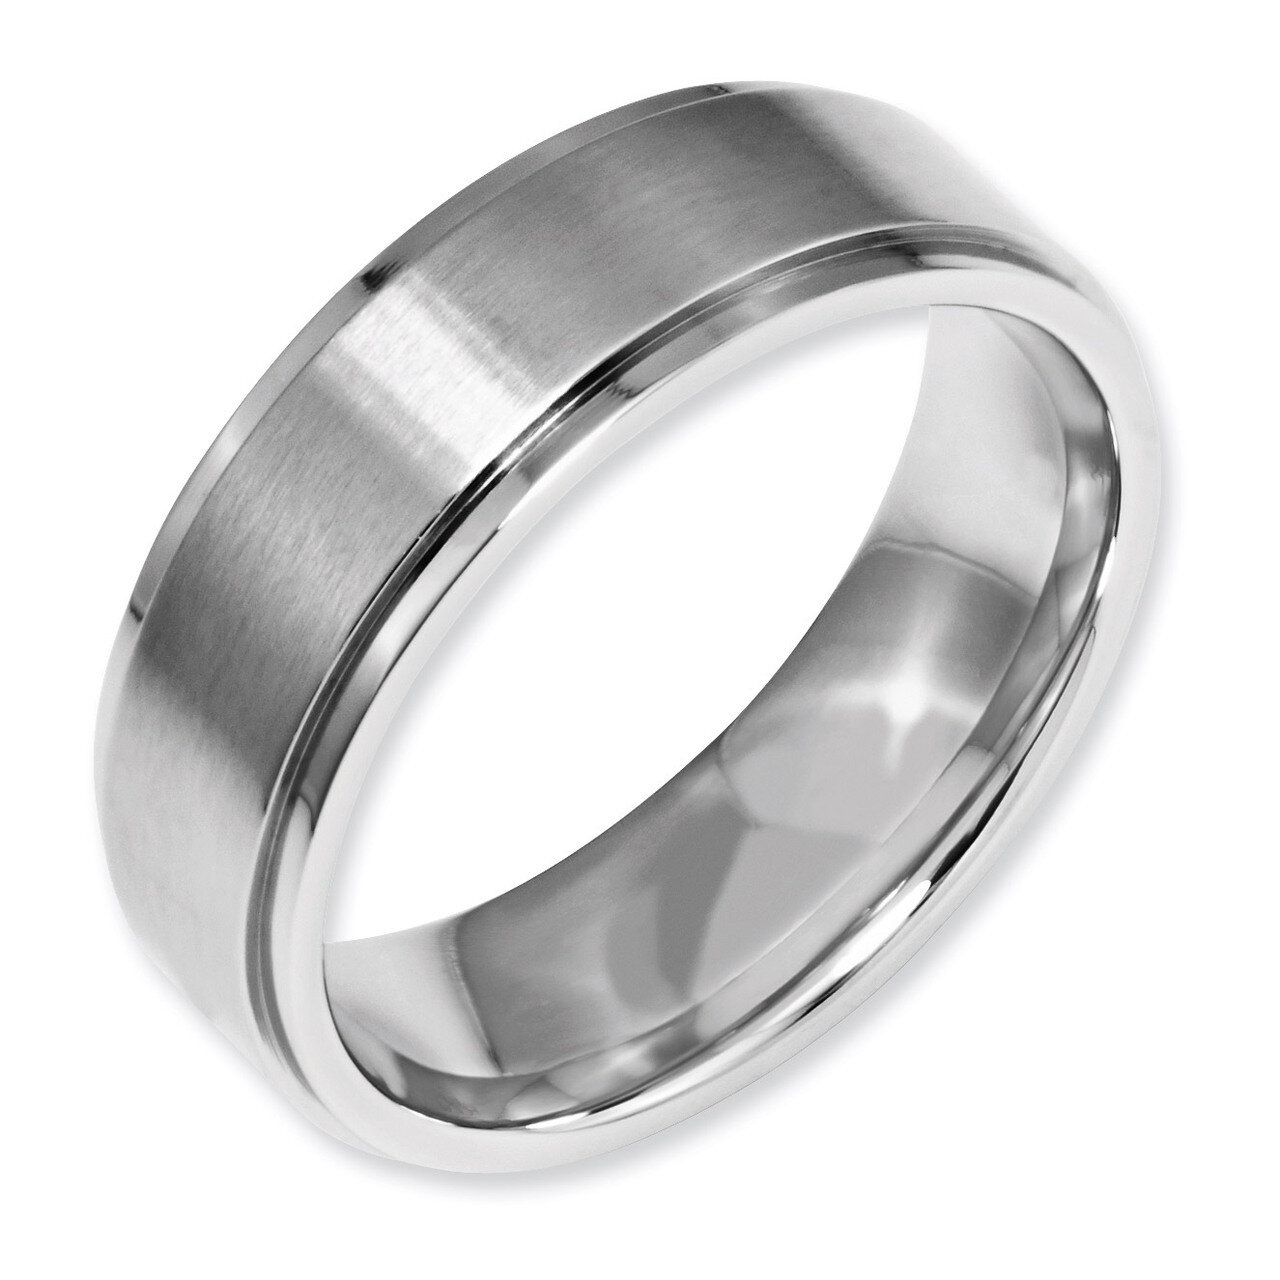 Ridged Edge 7mm Brushed and Polished Band - Stainless Steel SR33